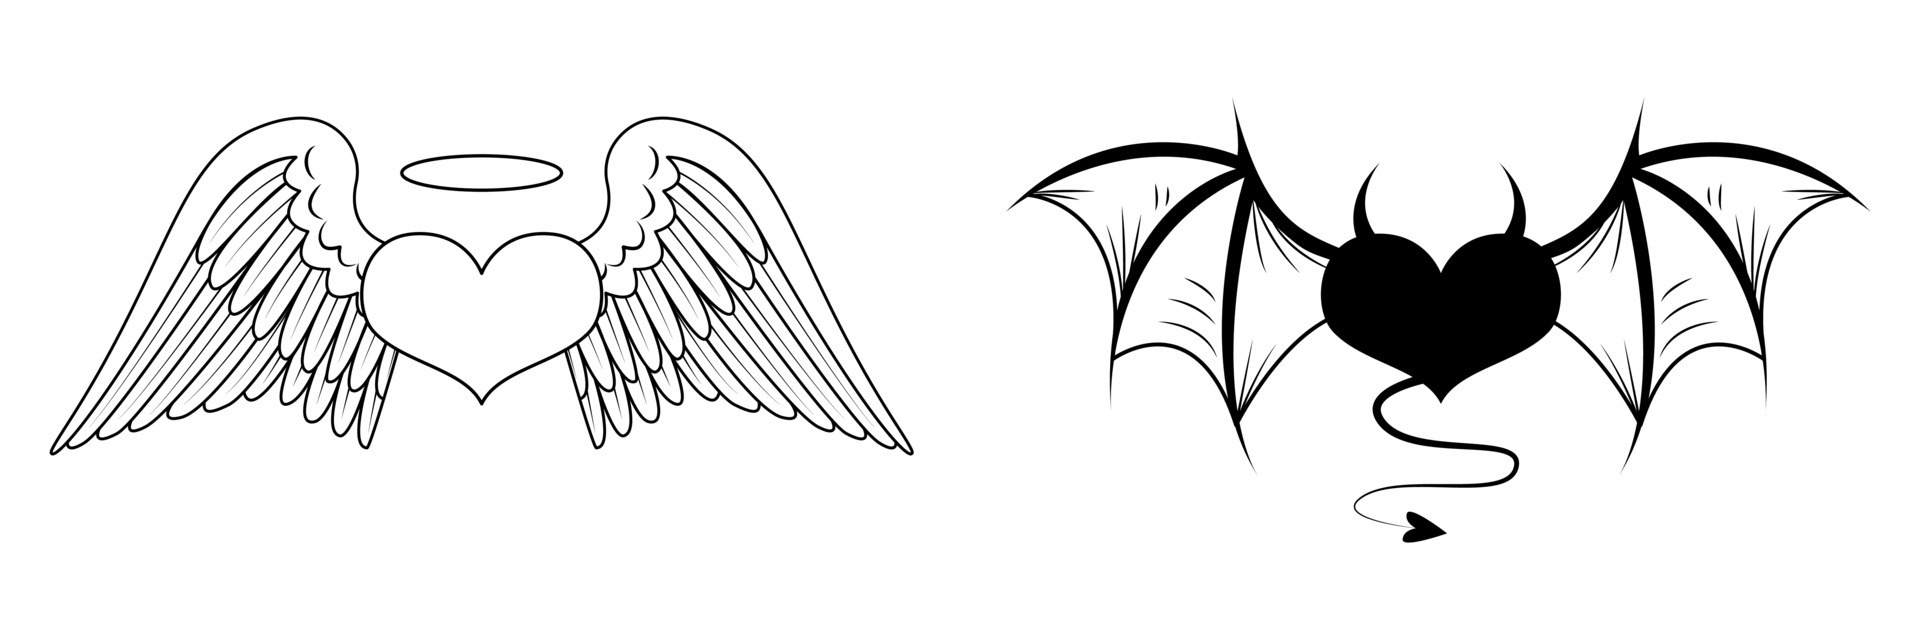 High Tides Tattoo - Angel and devil wings by @hathawaylane. | Facebook